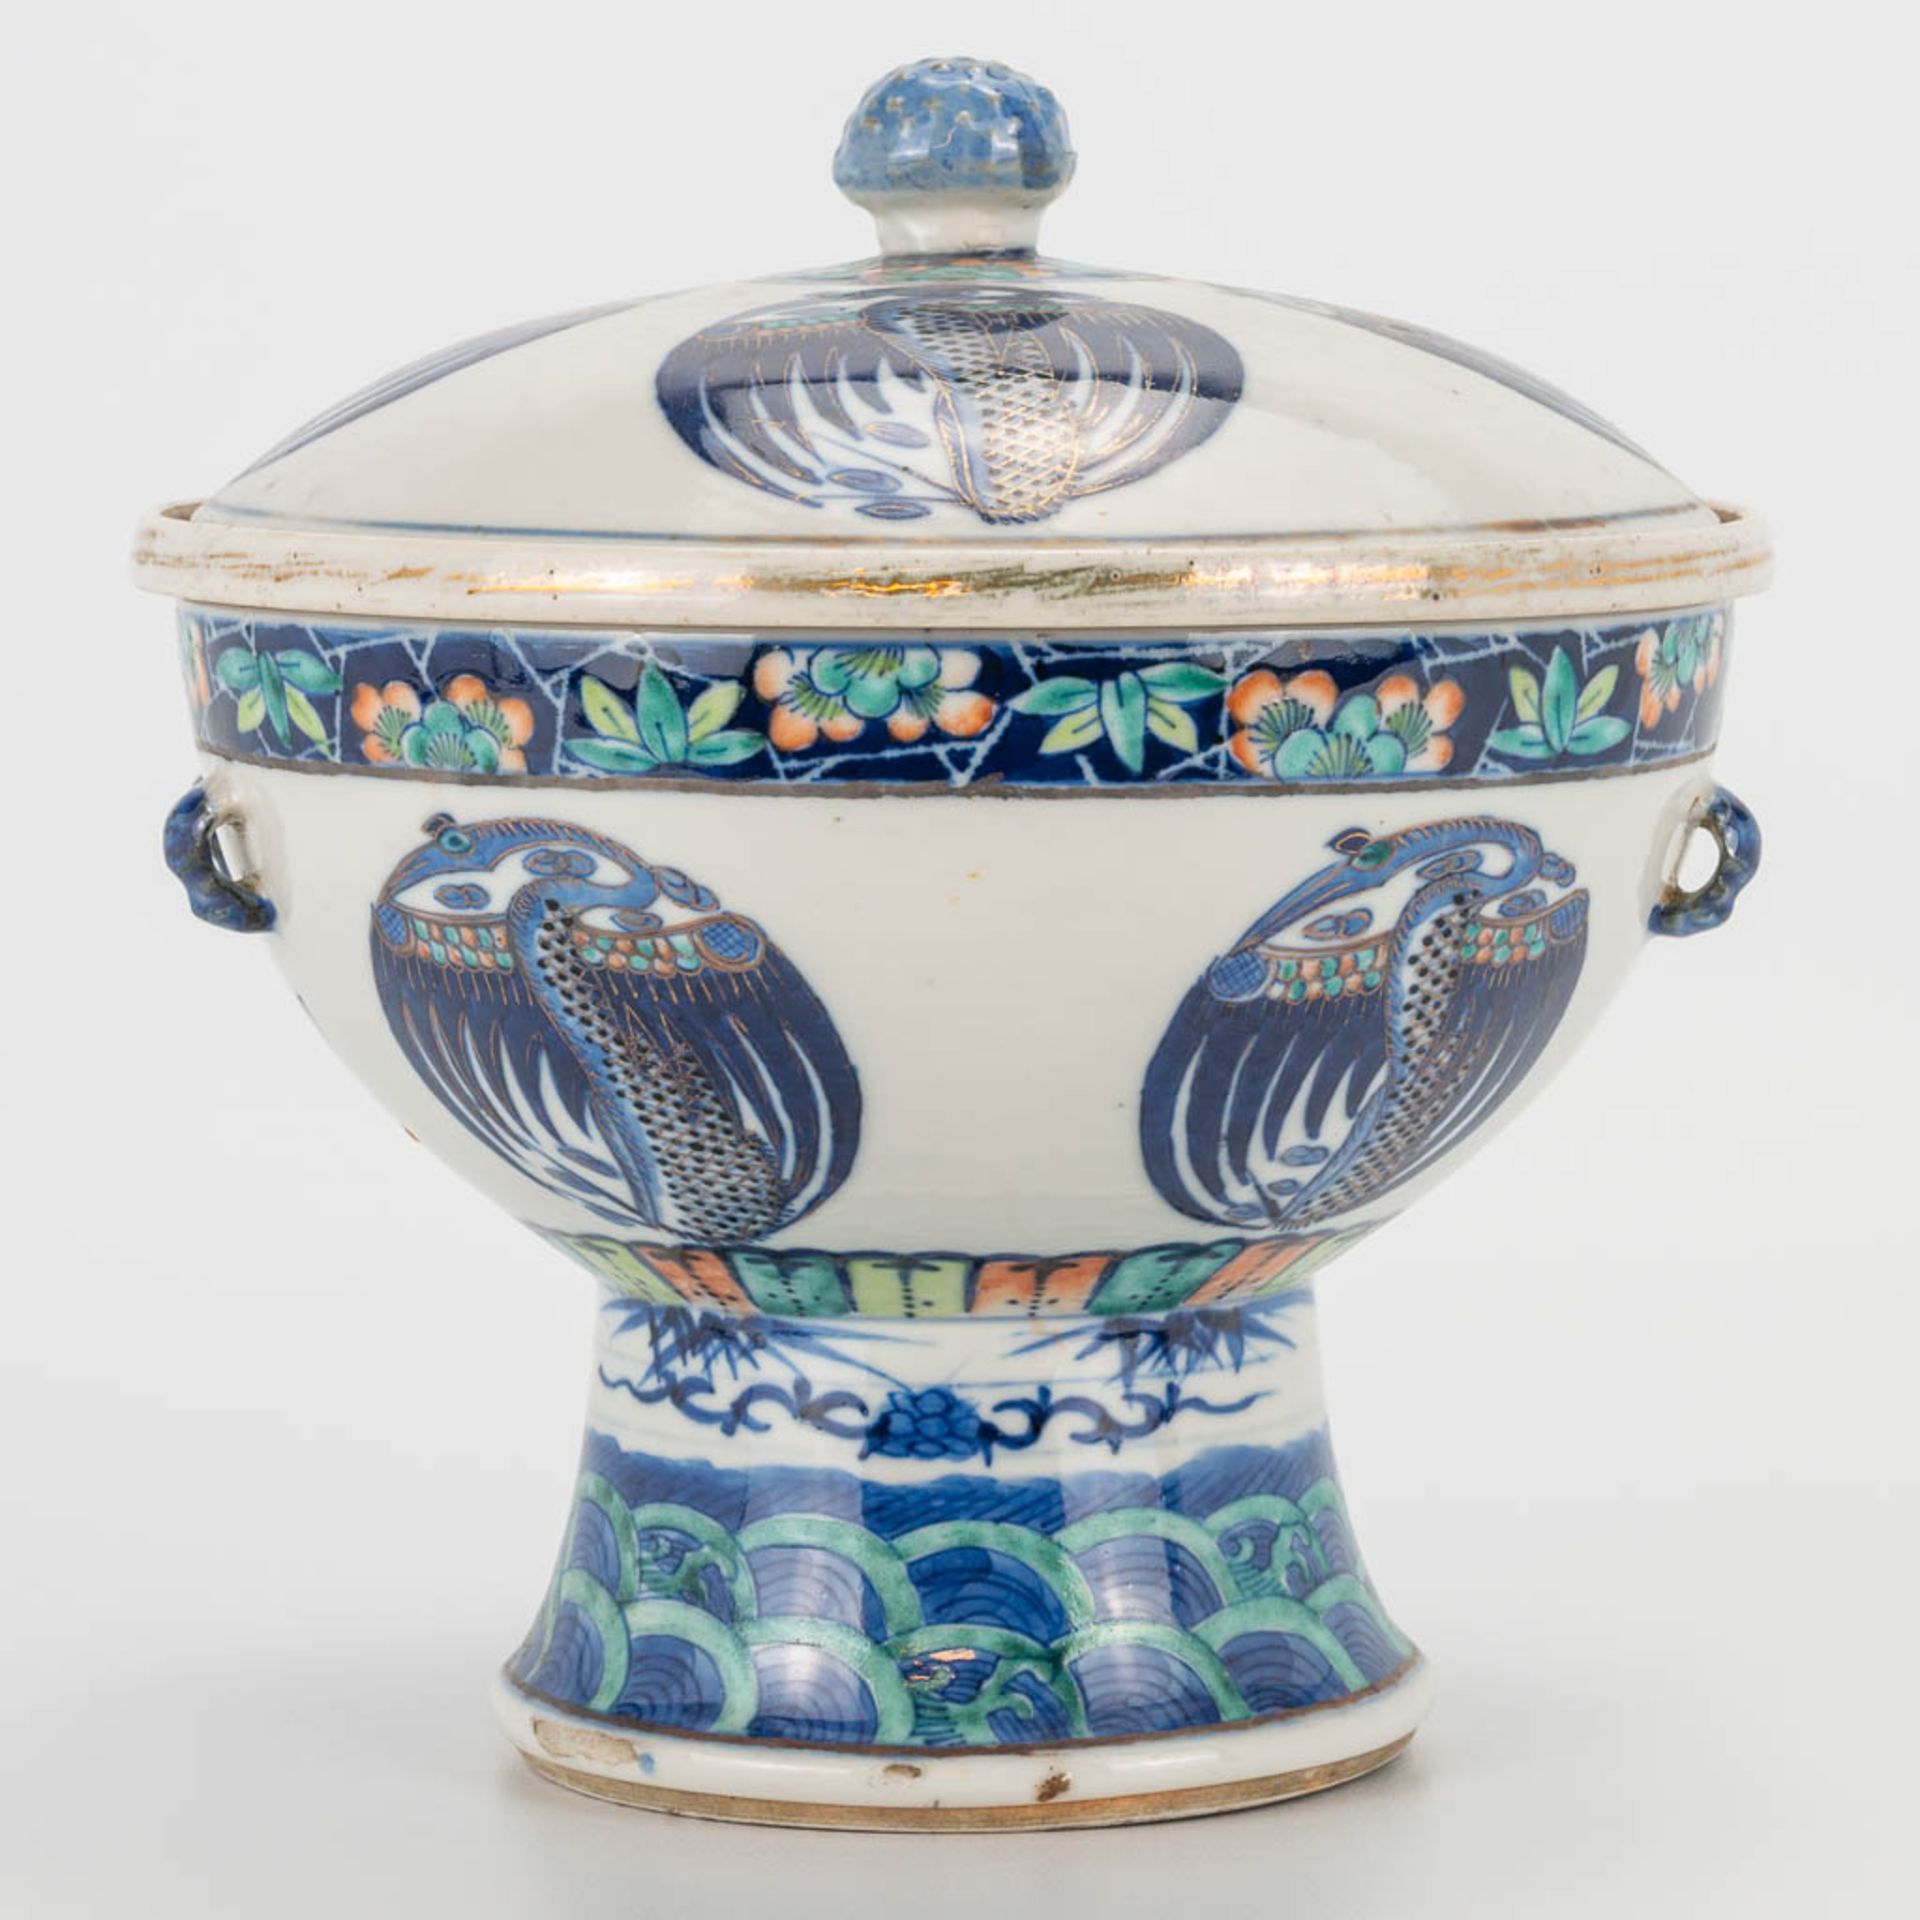 A 'Bain Marie' Douchai made of Chinese porcelain, Tching dinasty, 19th century.Ê (21 x 20 cm)